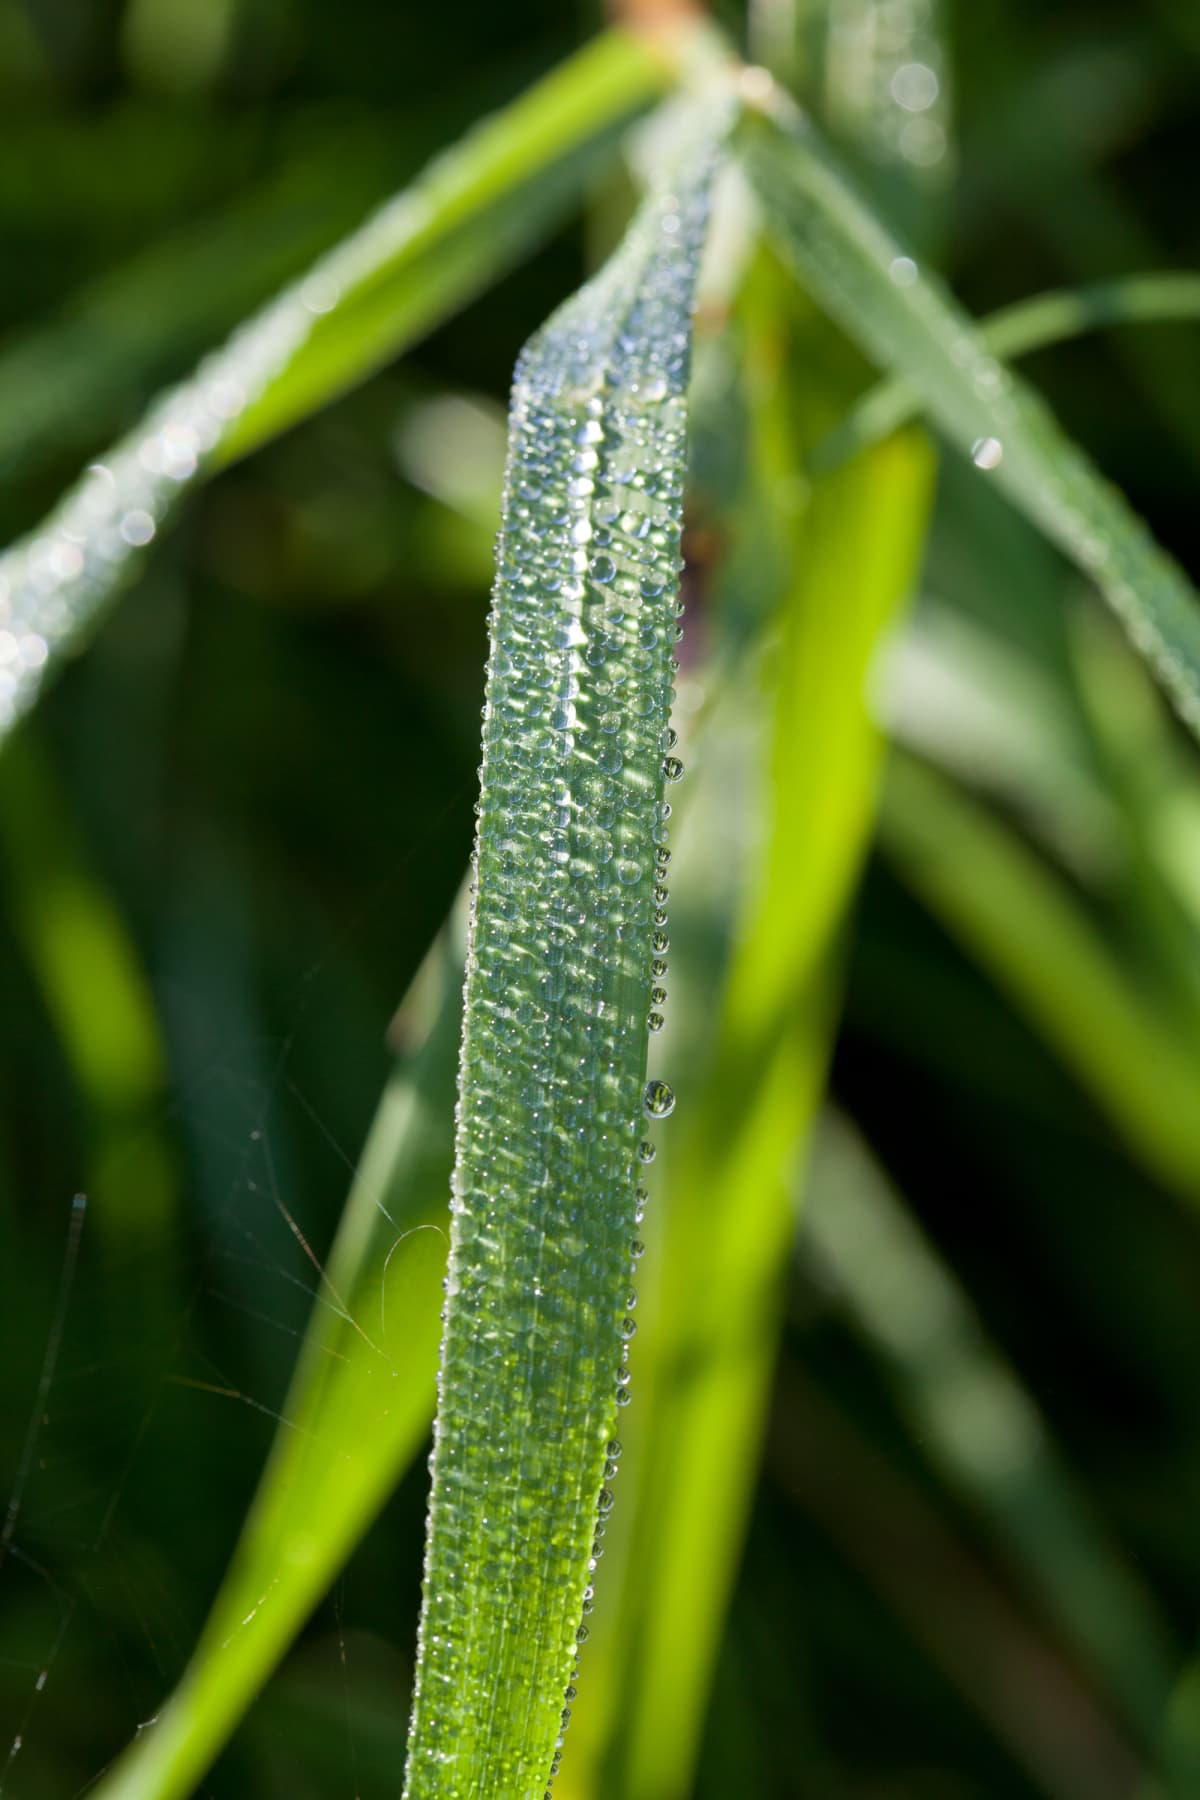 morning dew on green leaves of carex grass